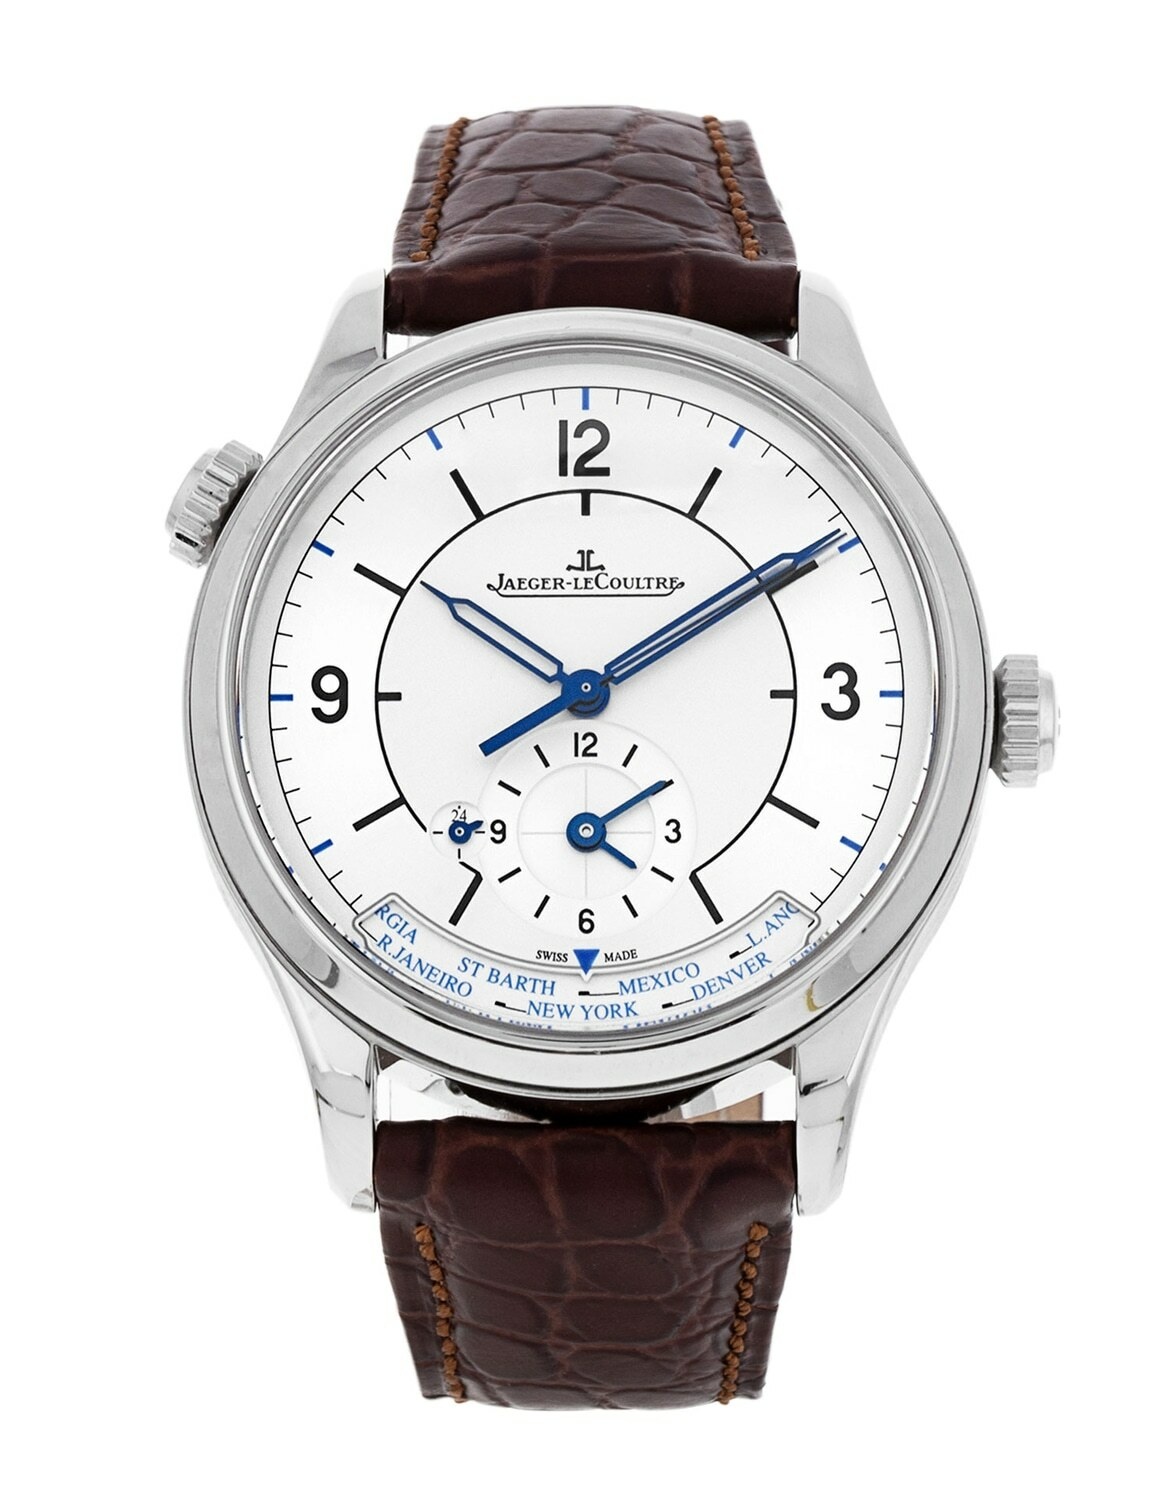 Jaeger-LeCoultre Master Geographic 1428530 Jaeger-LeCoultre